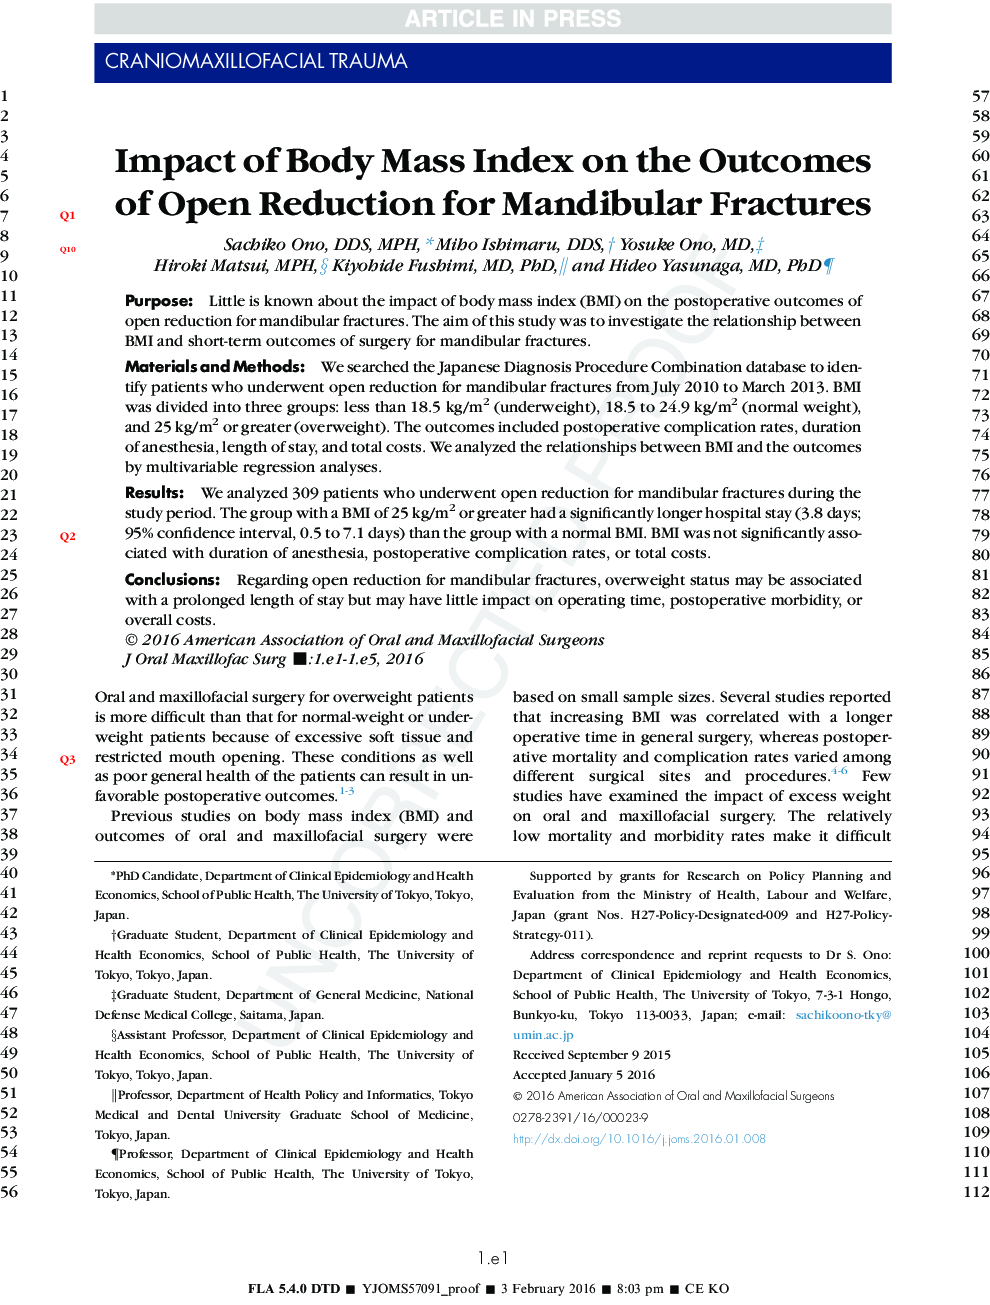 Impact of Body Mass Index on the Outcomes of Open Reduction for Mandibular Fractures